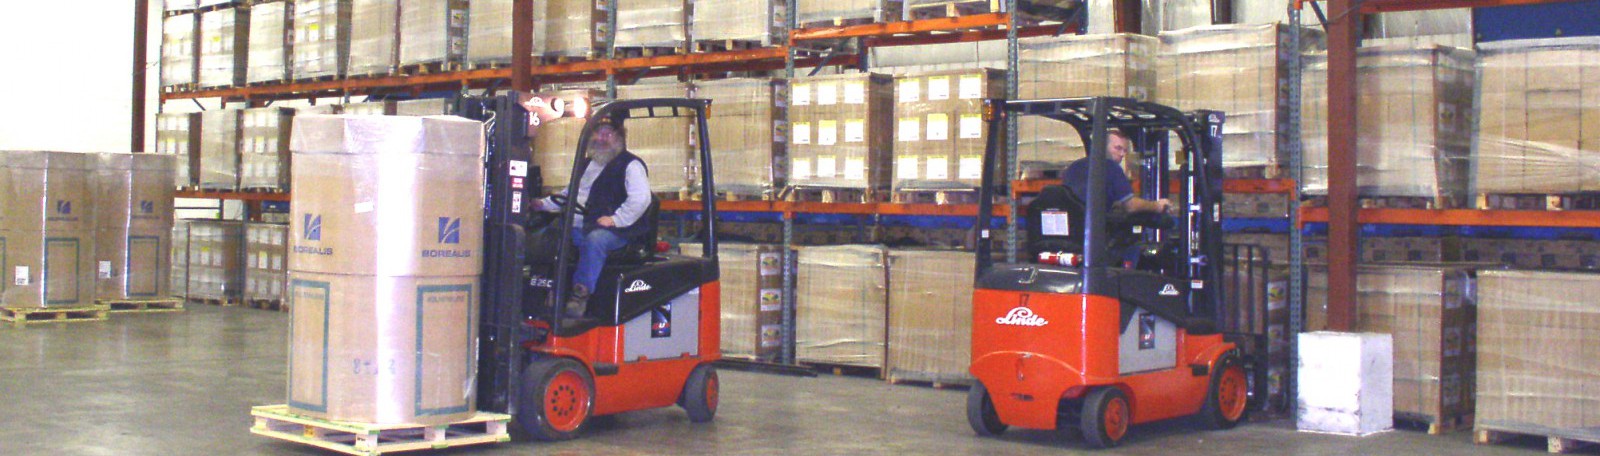 Two men on forklifts moving boxes off of shelves